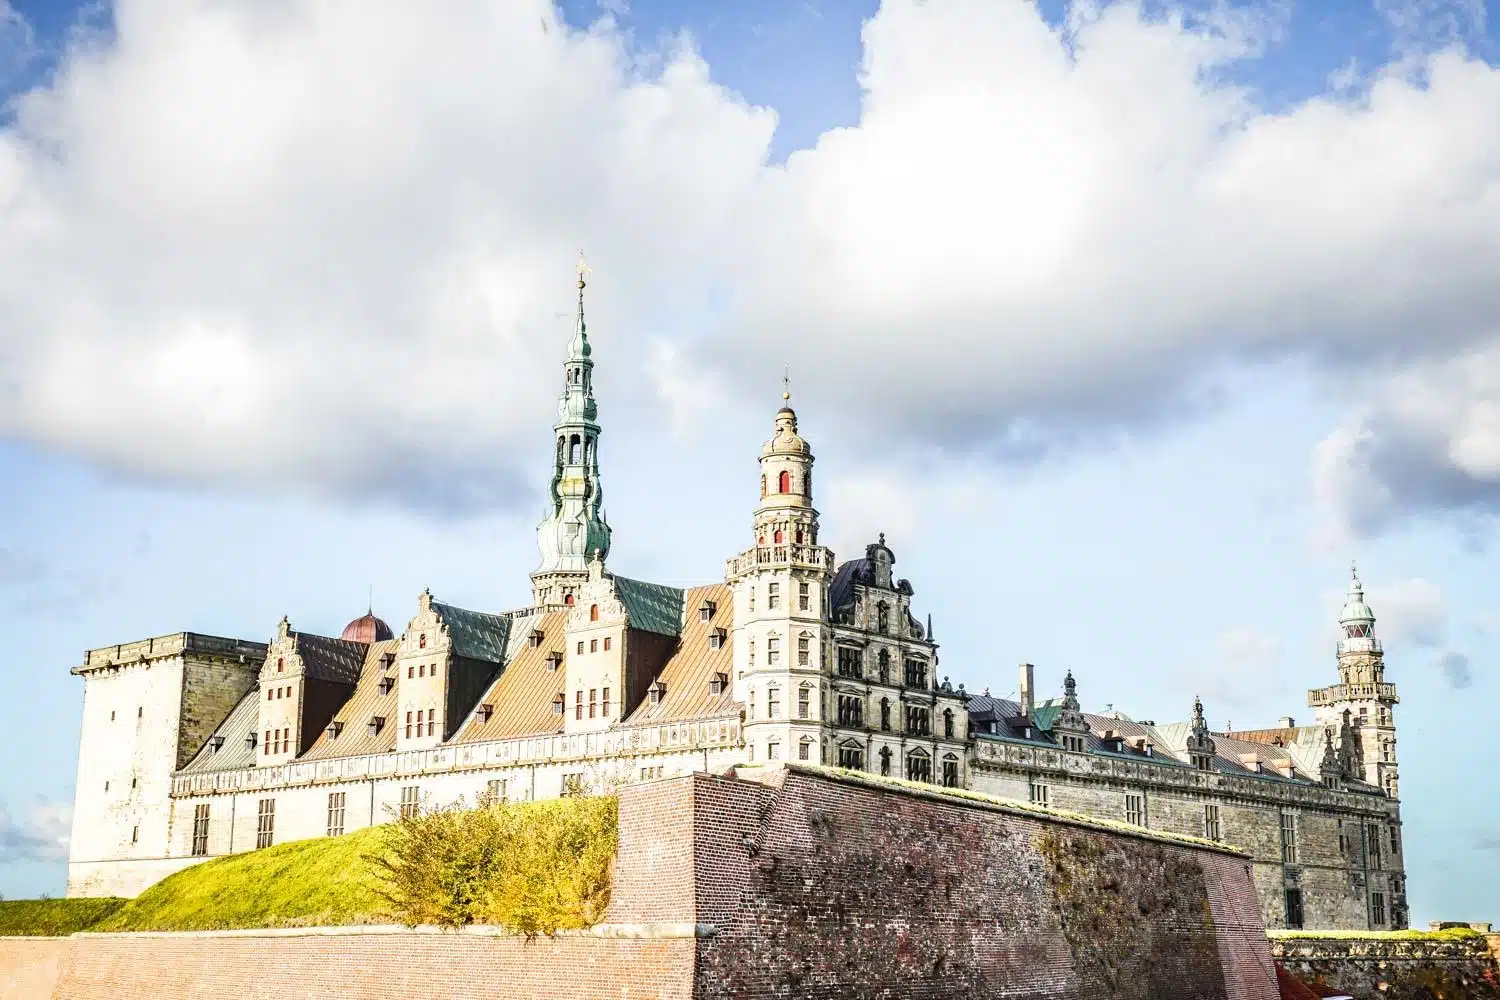 Kronborg Slot is also included in the Copenhagen Card